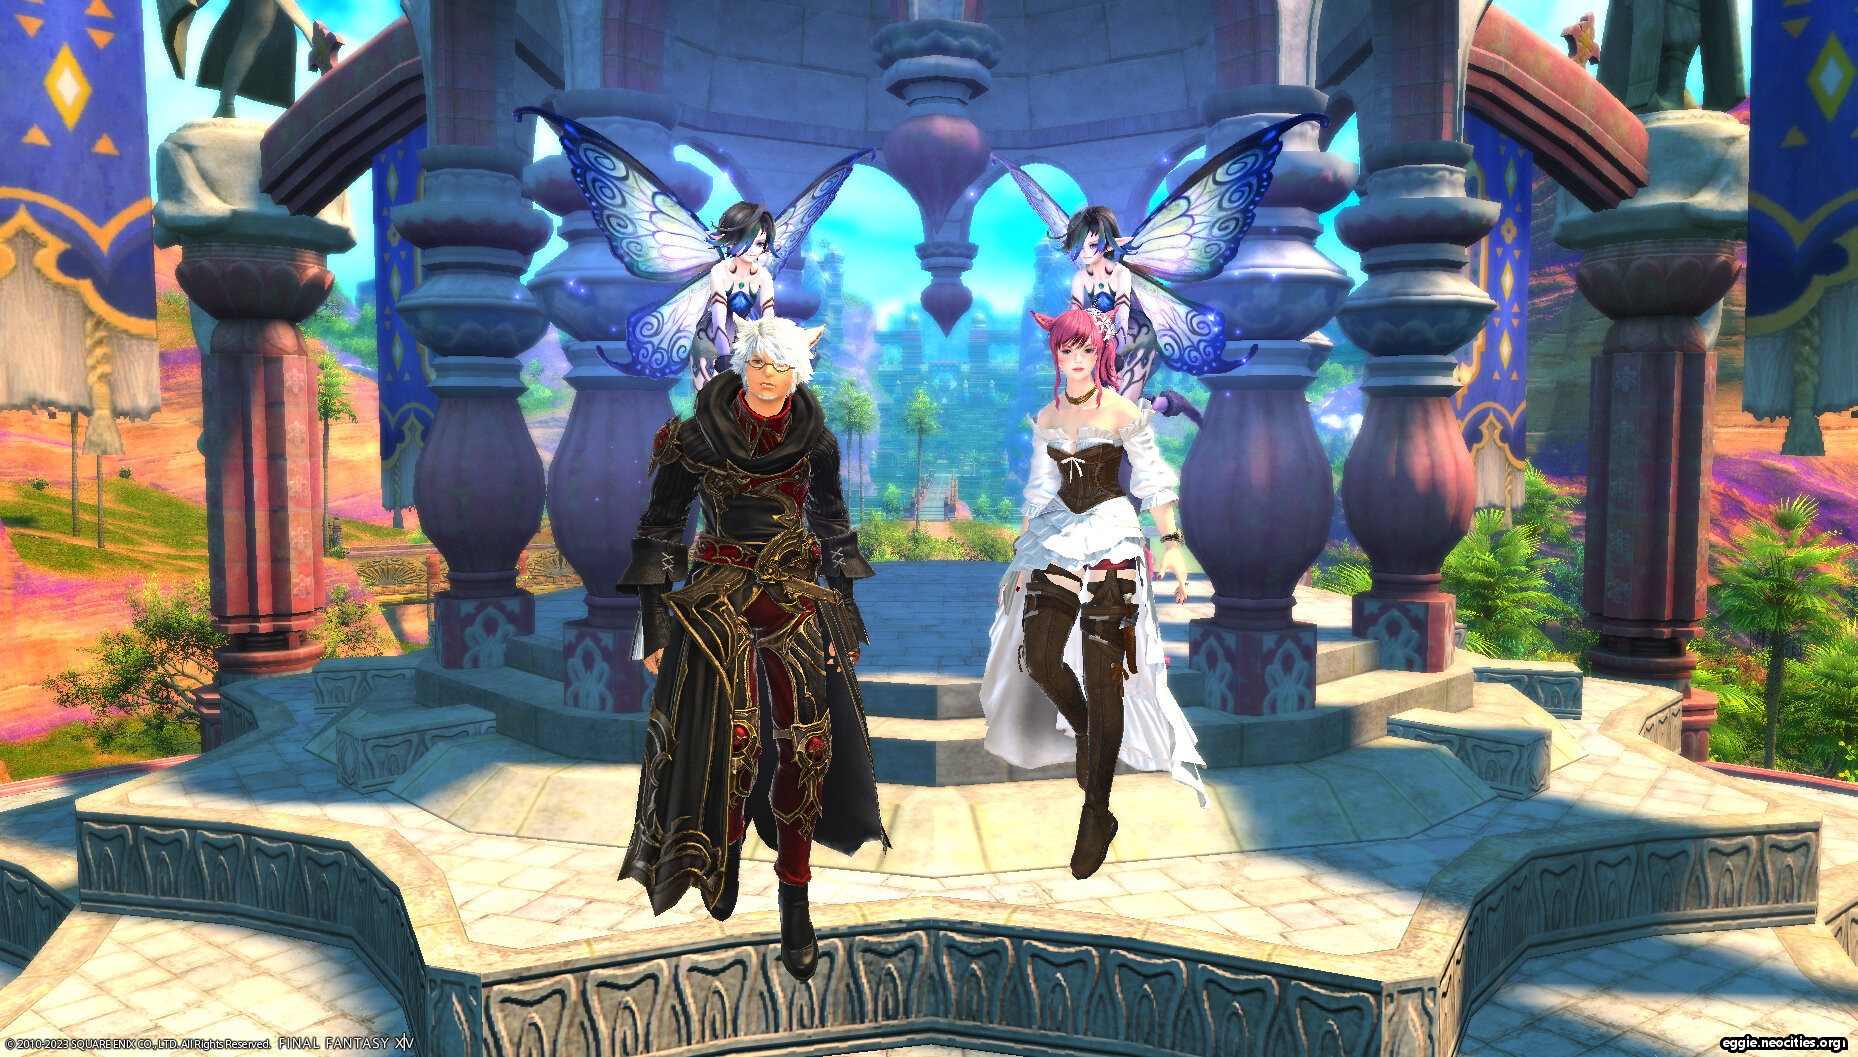 Xarale and Zel in Thavnair with their Statice mounts.